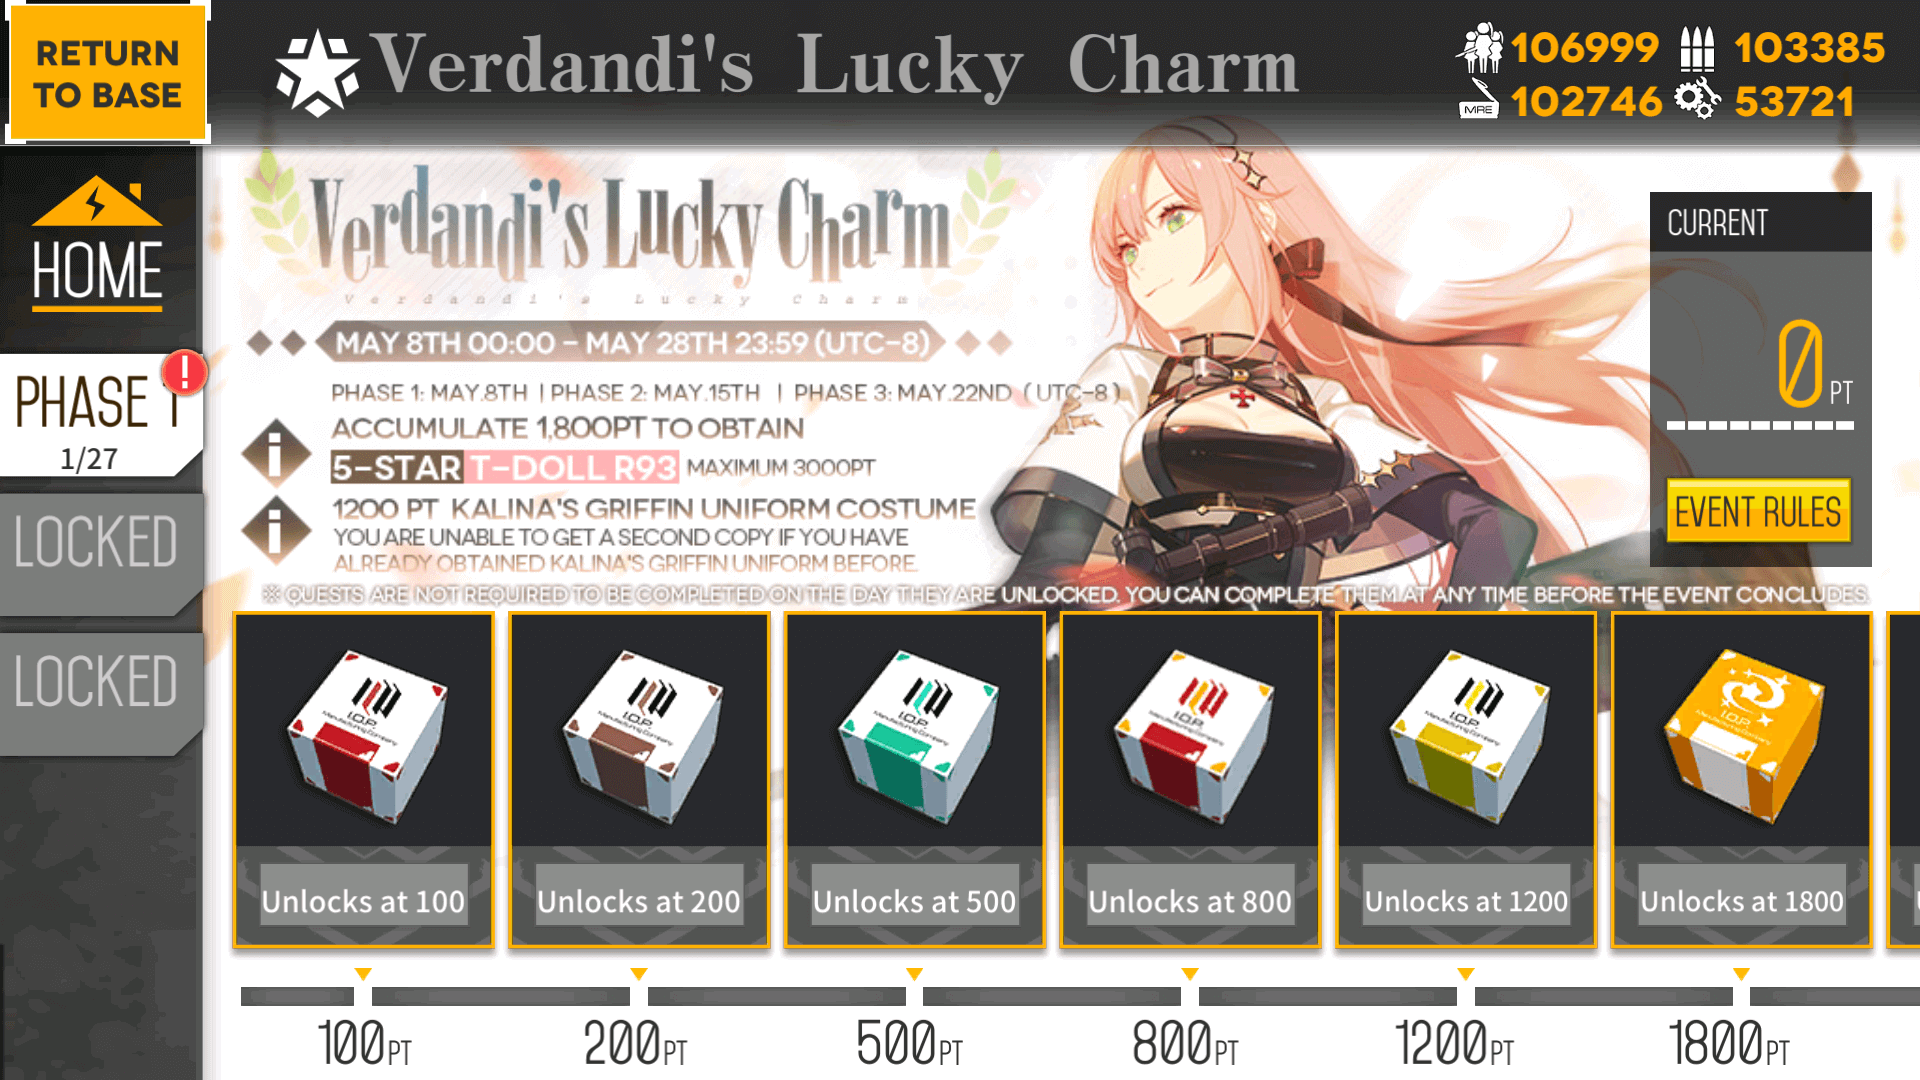 Event Rewards for the "Verdandi's Lucky Charm" Point Event.